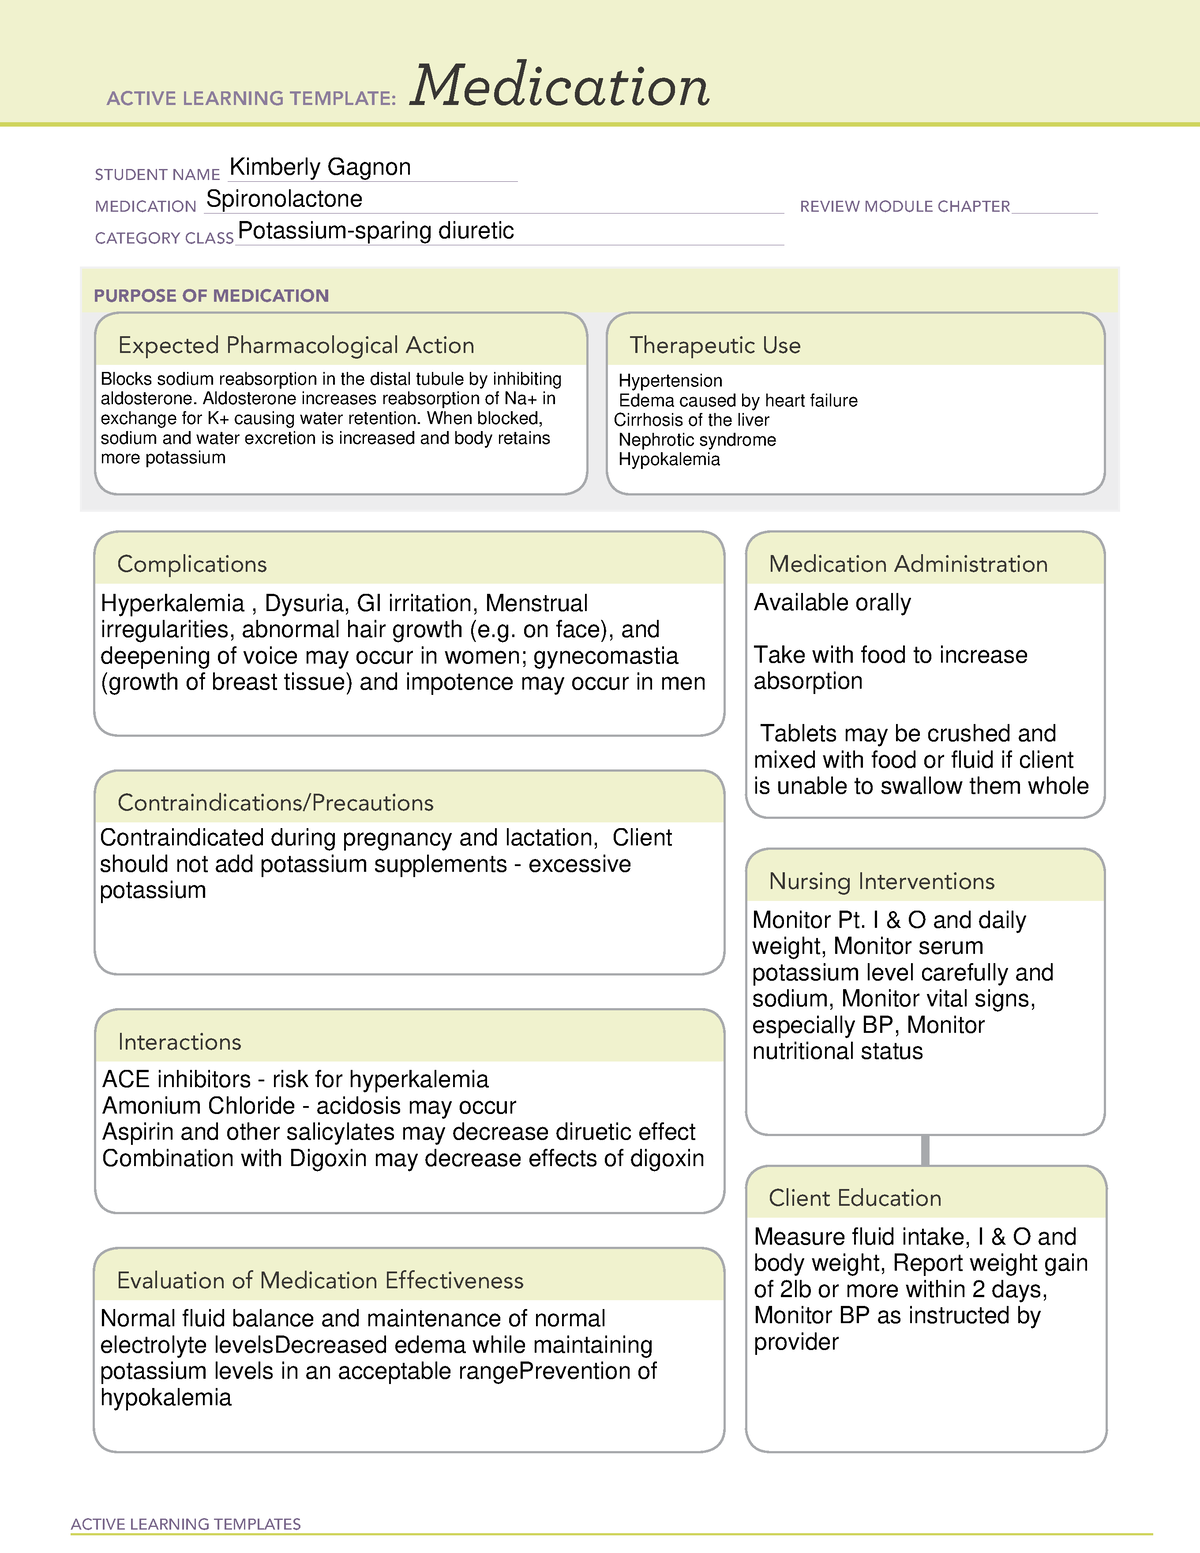 Spironolactone ATI Medication Template ACTIVE LEARNING TEMPLATES